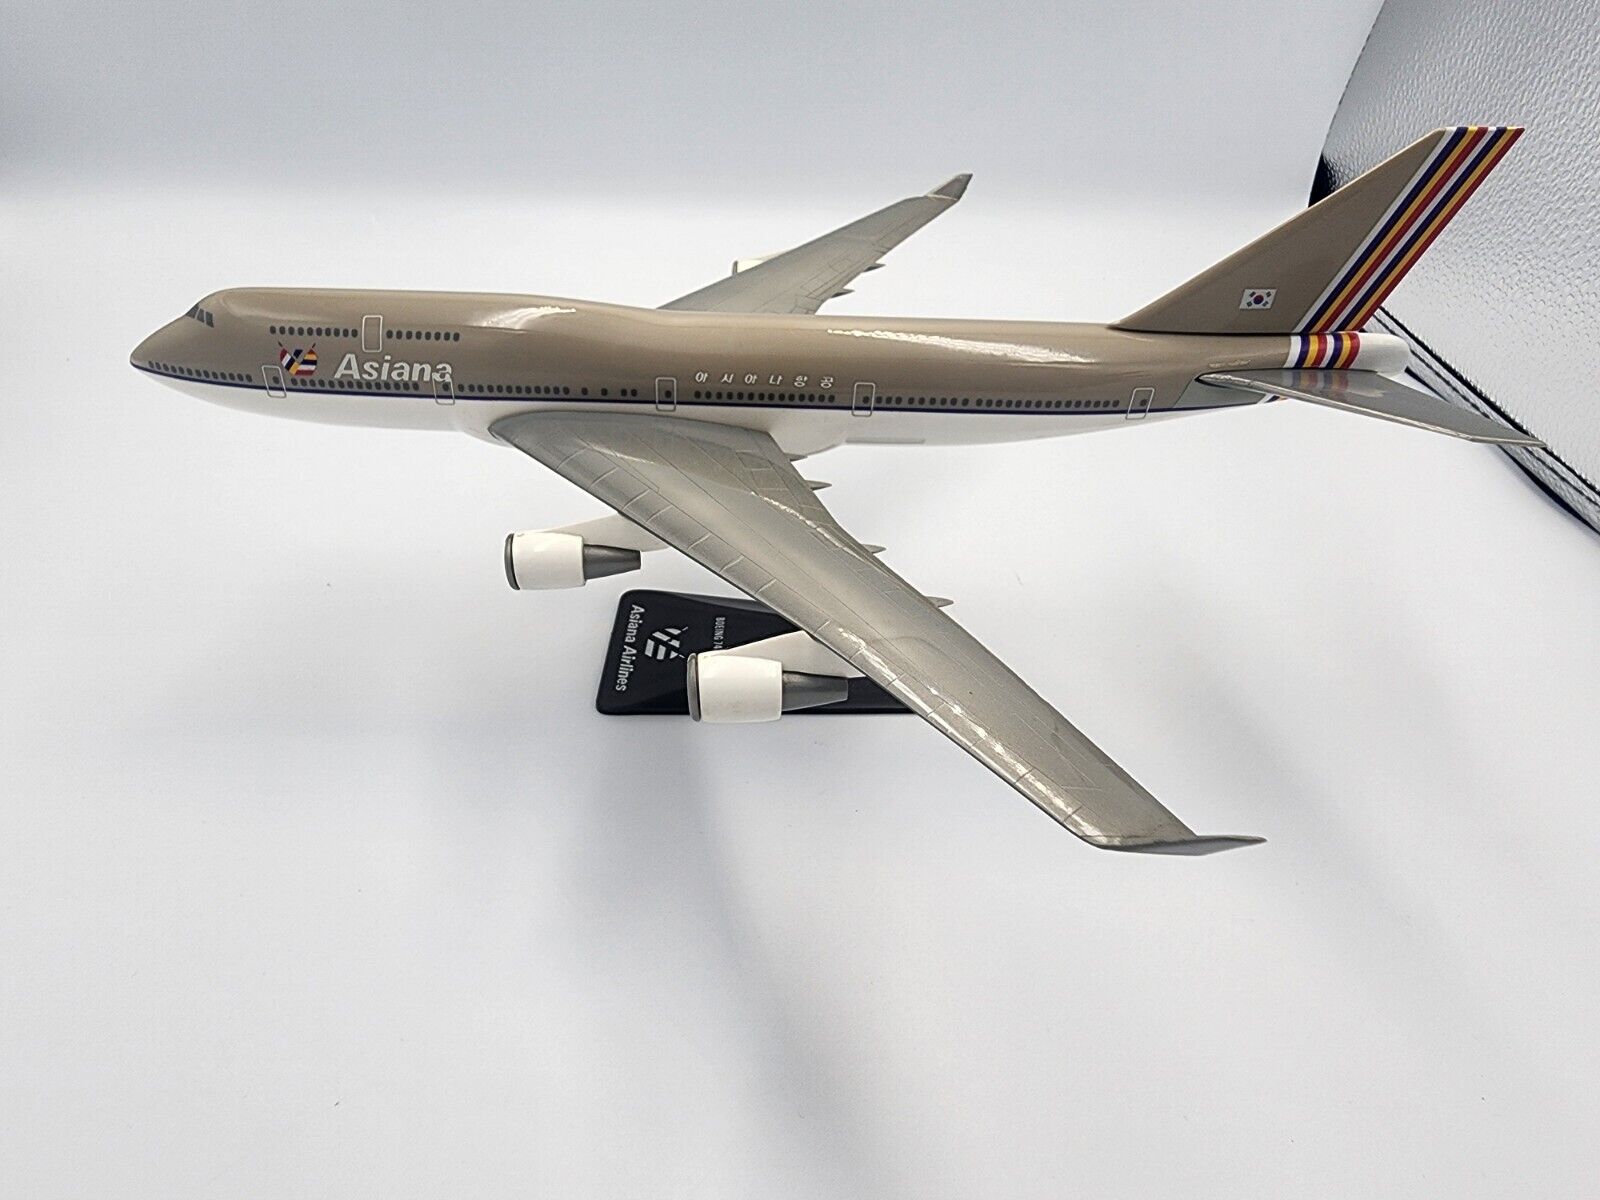 Asiana Airlines AIRCRAFT MODEL B747-400 SCALE 1:400